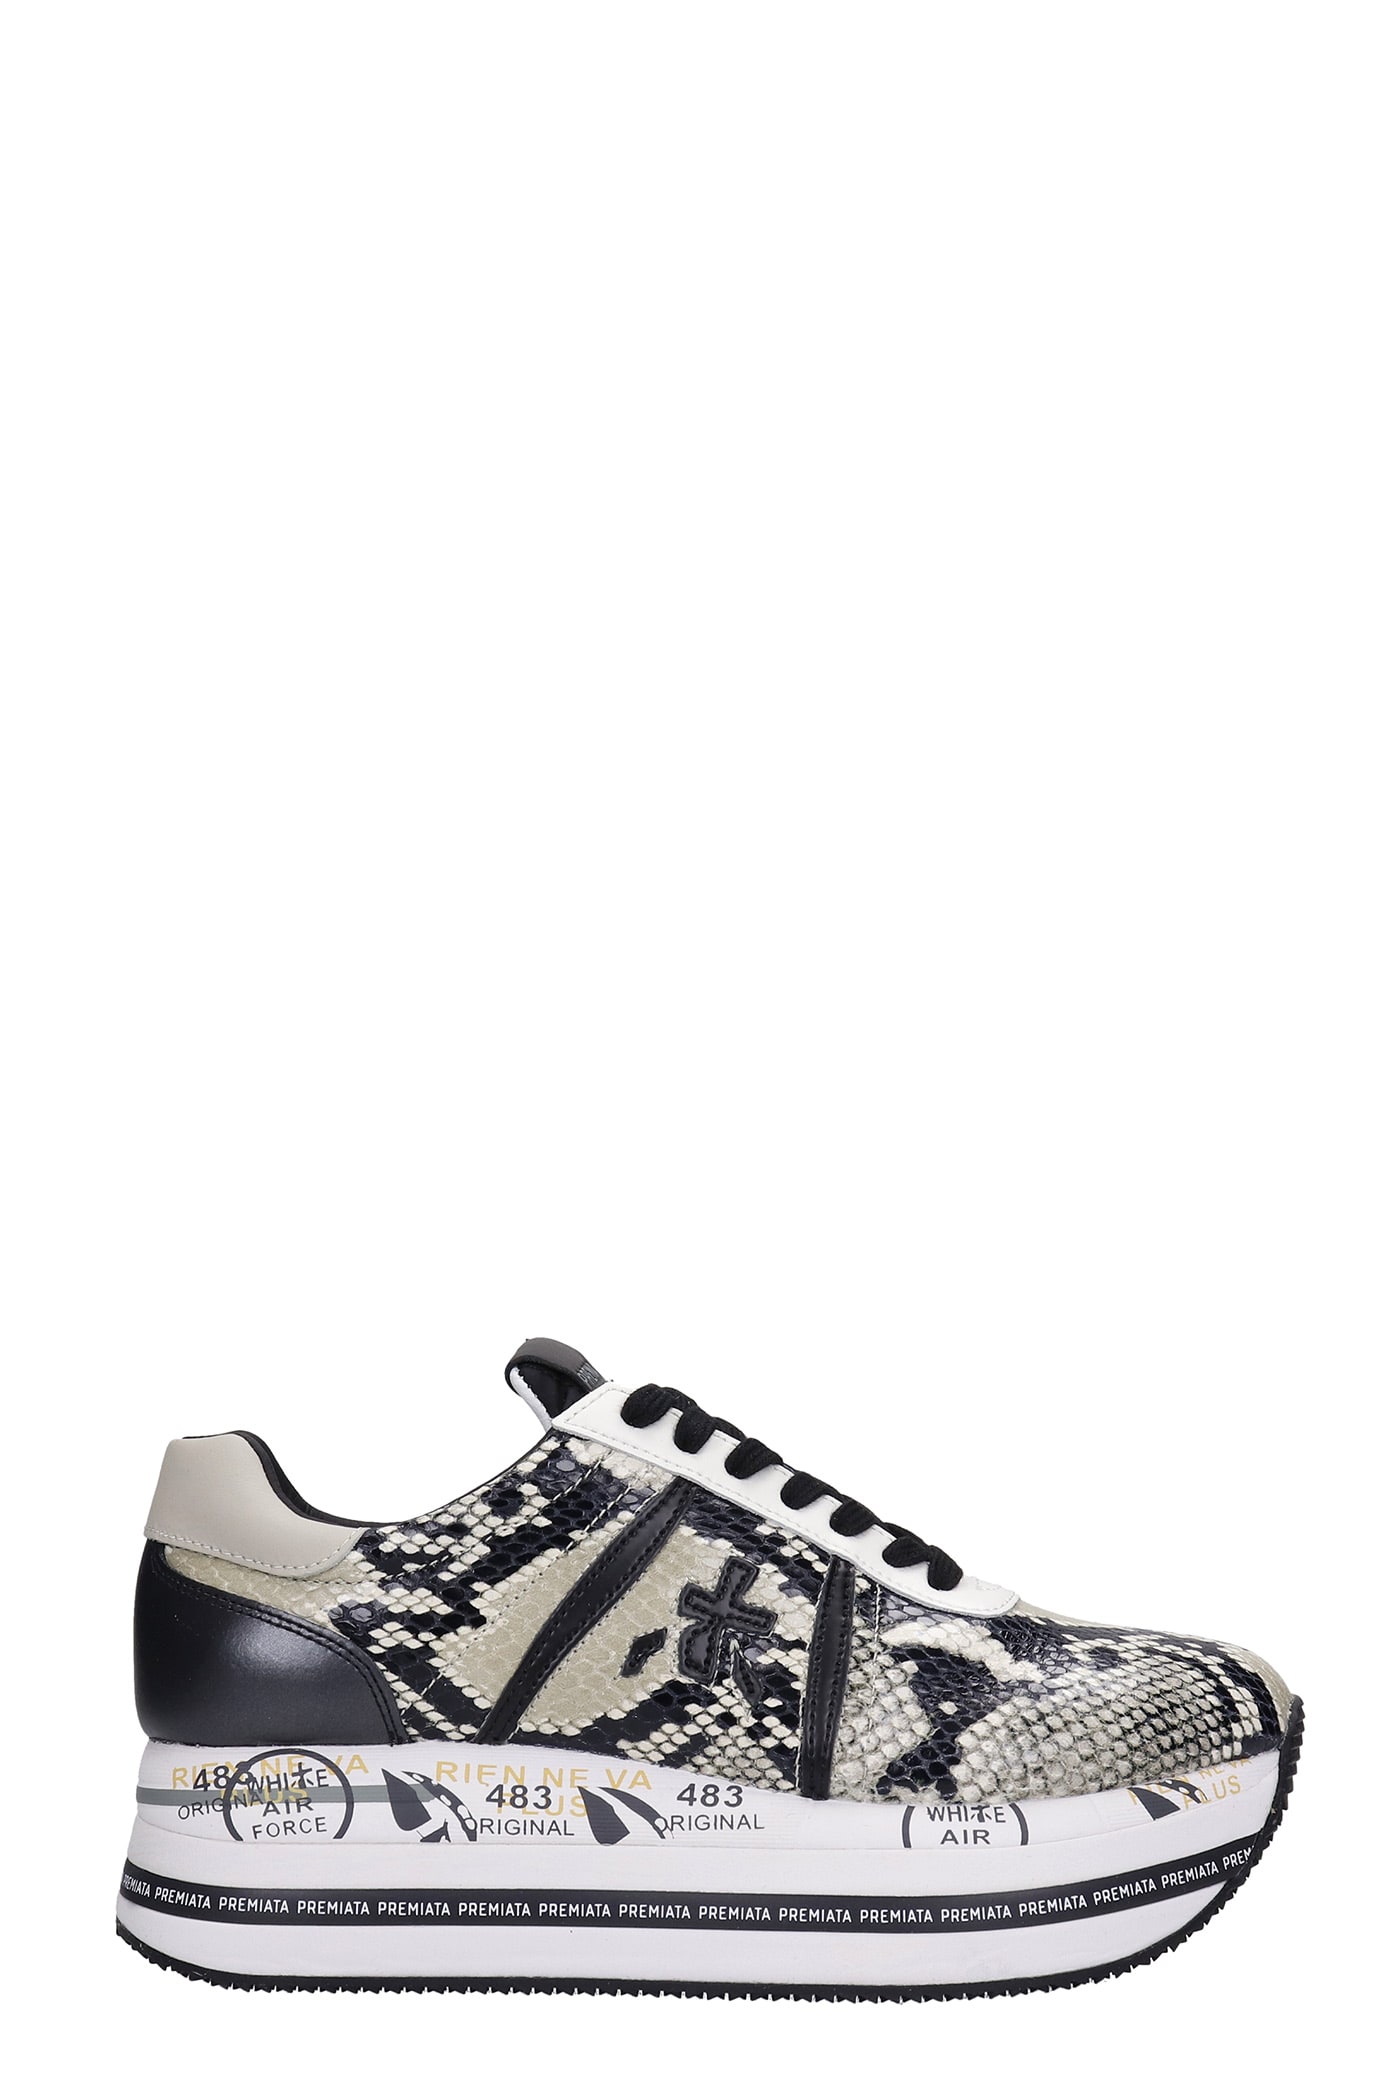 Premiata Beth Sneakers In Python Print Leather